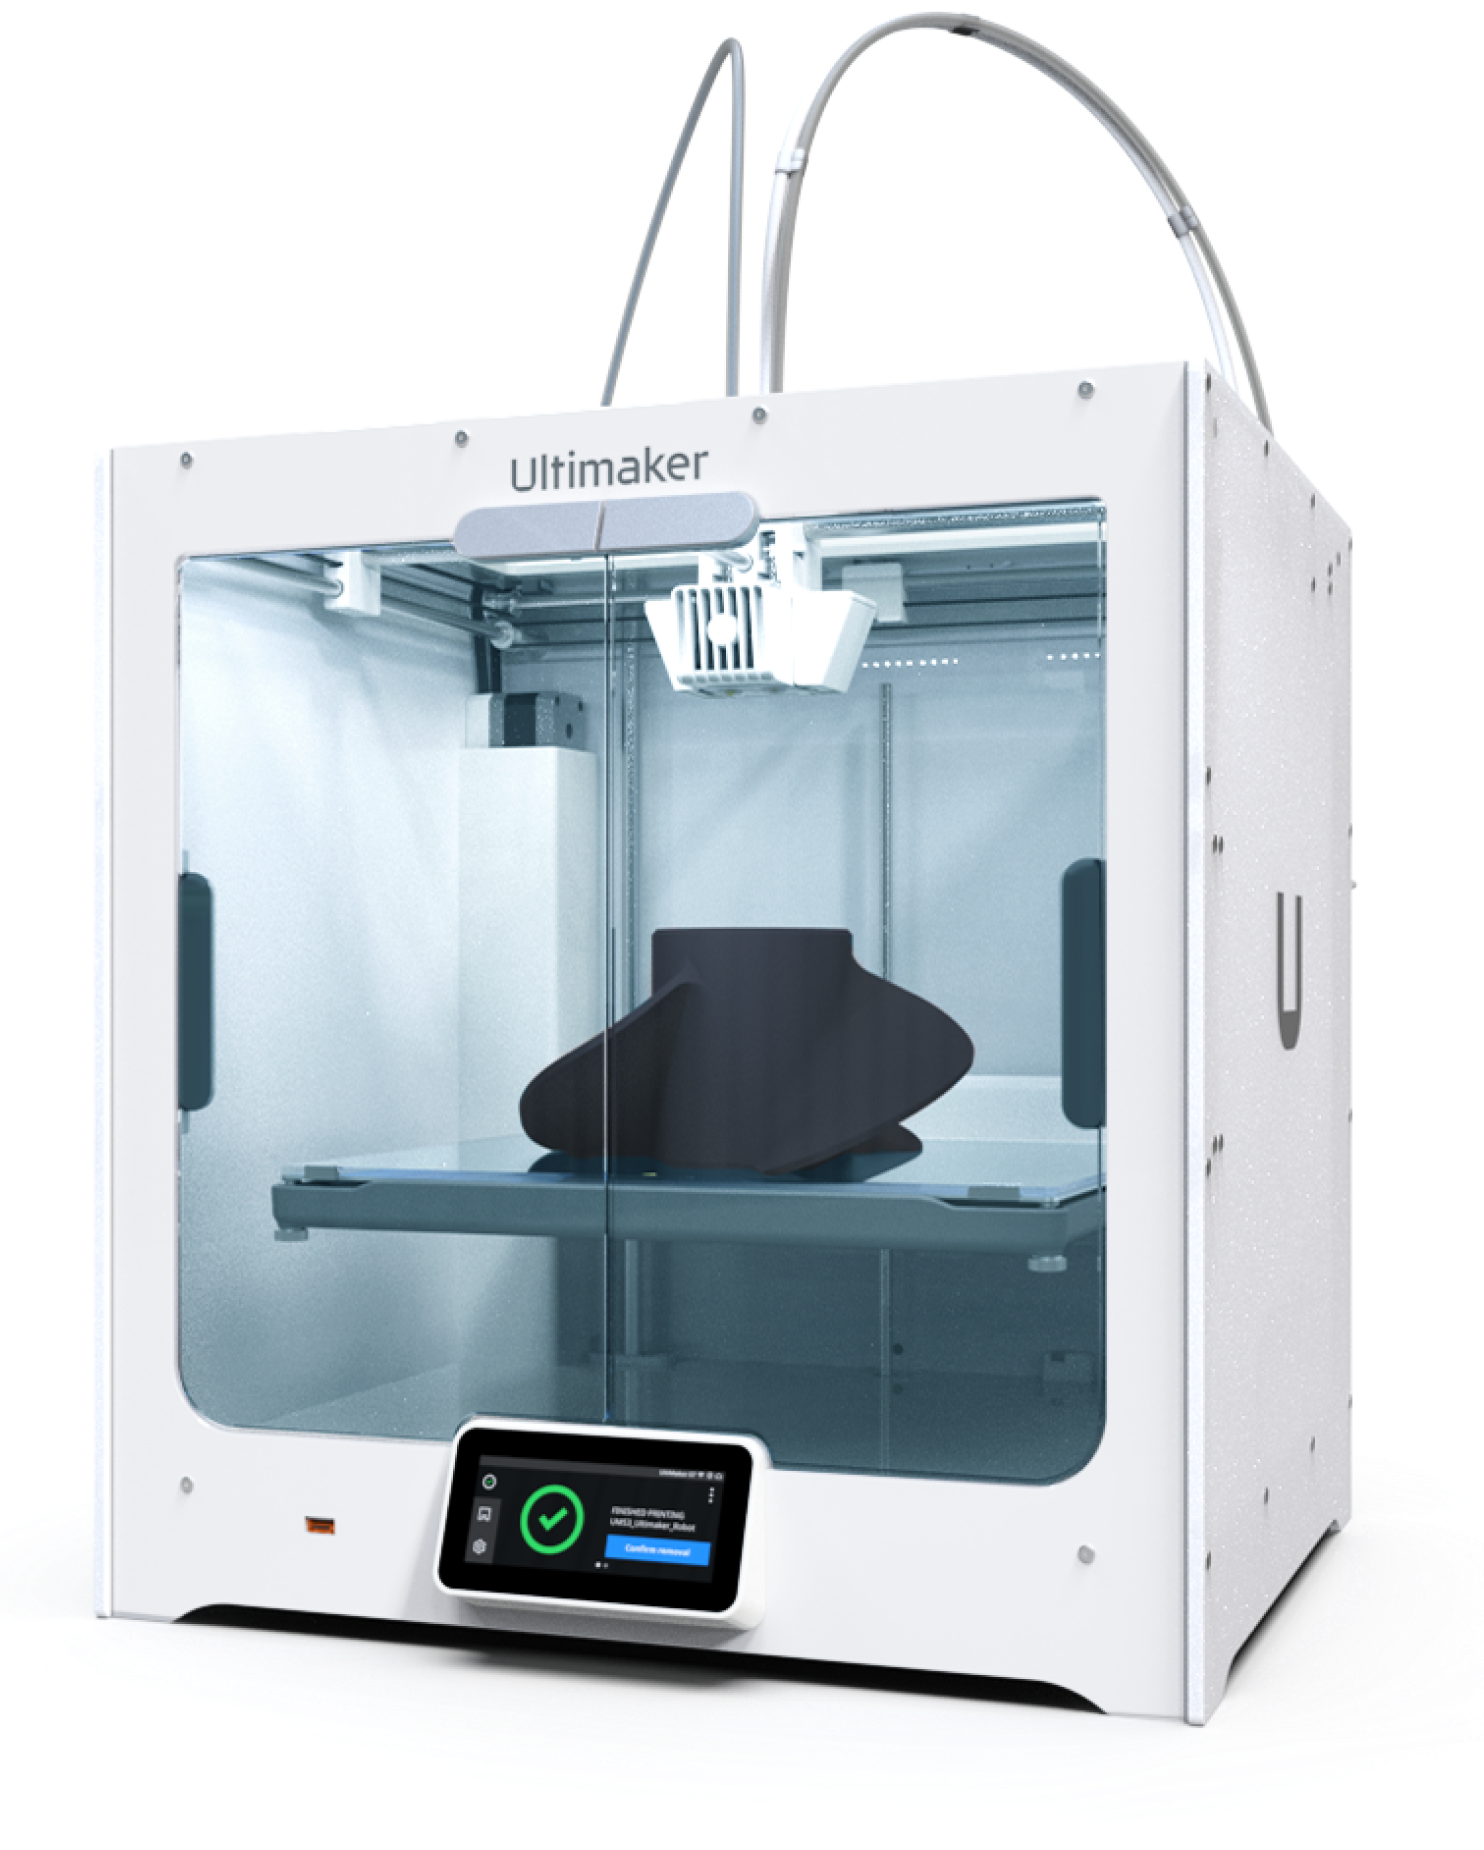 malm svinekød Ultimate UltiMaker S5: Expand your 3D printing ambitions